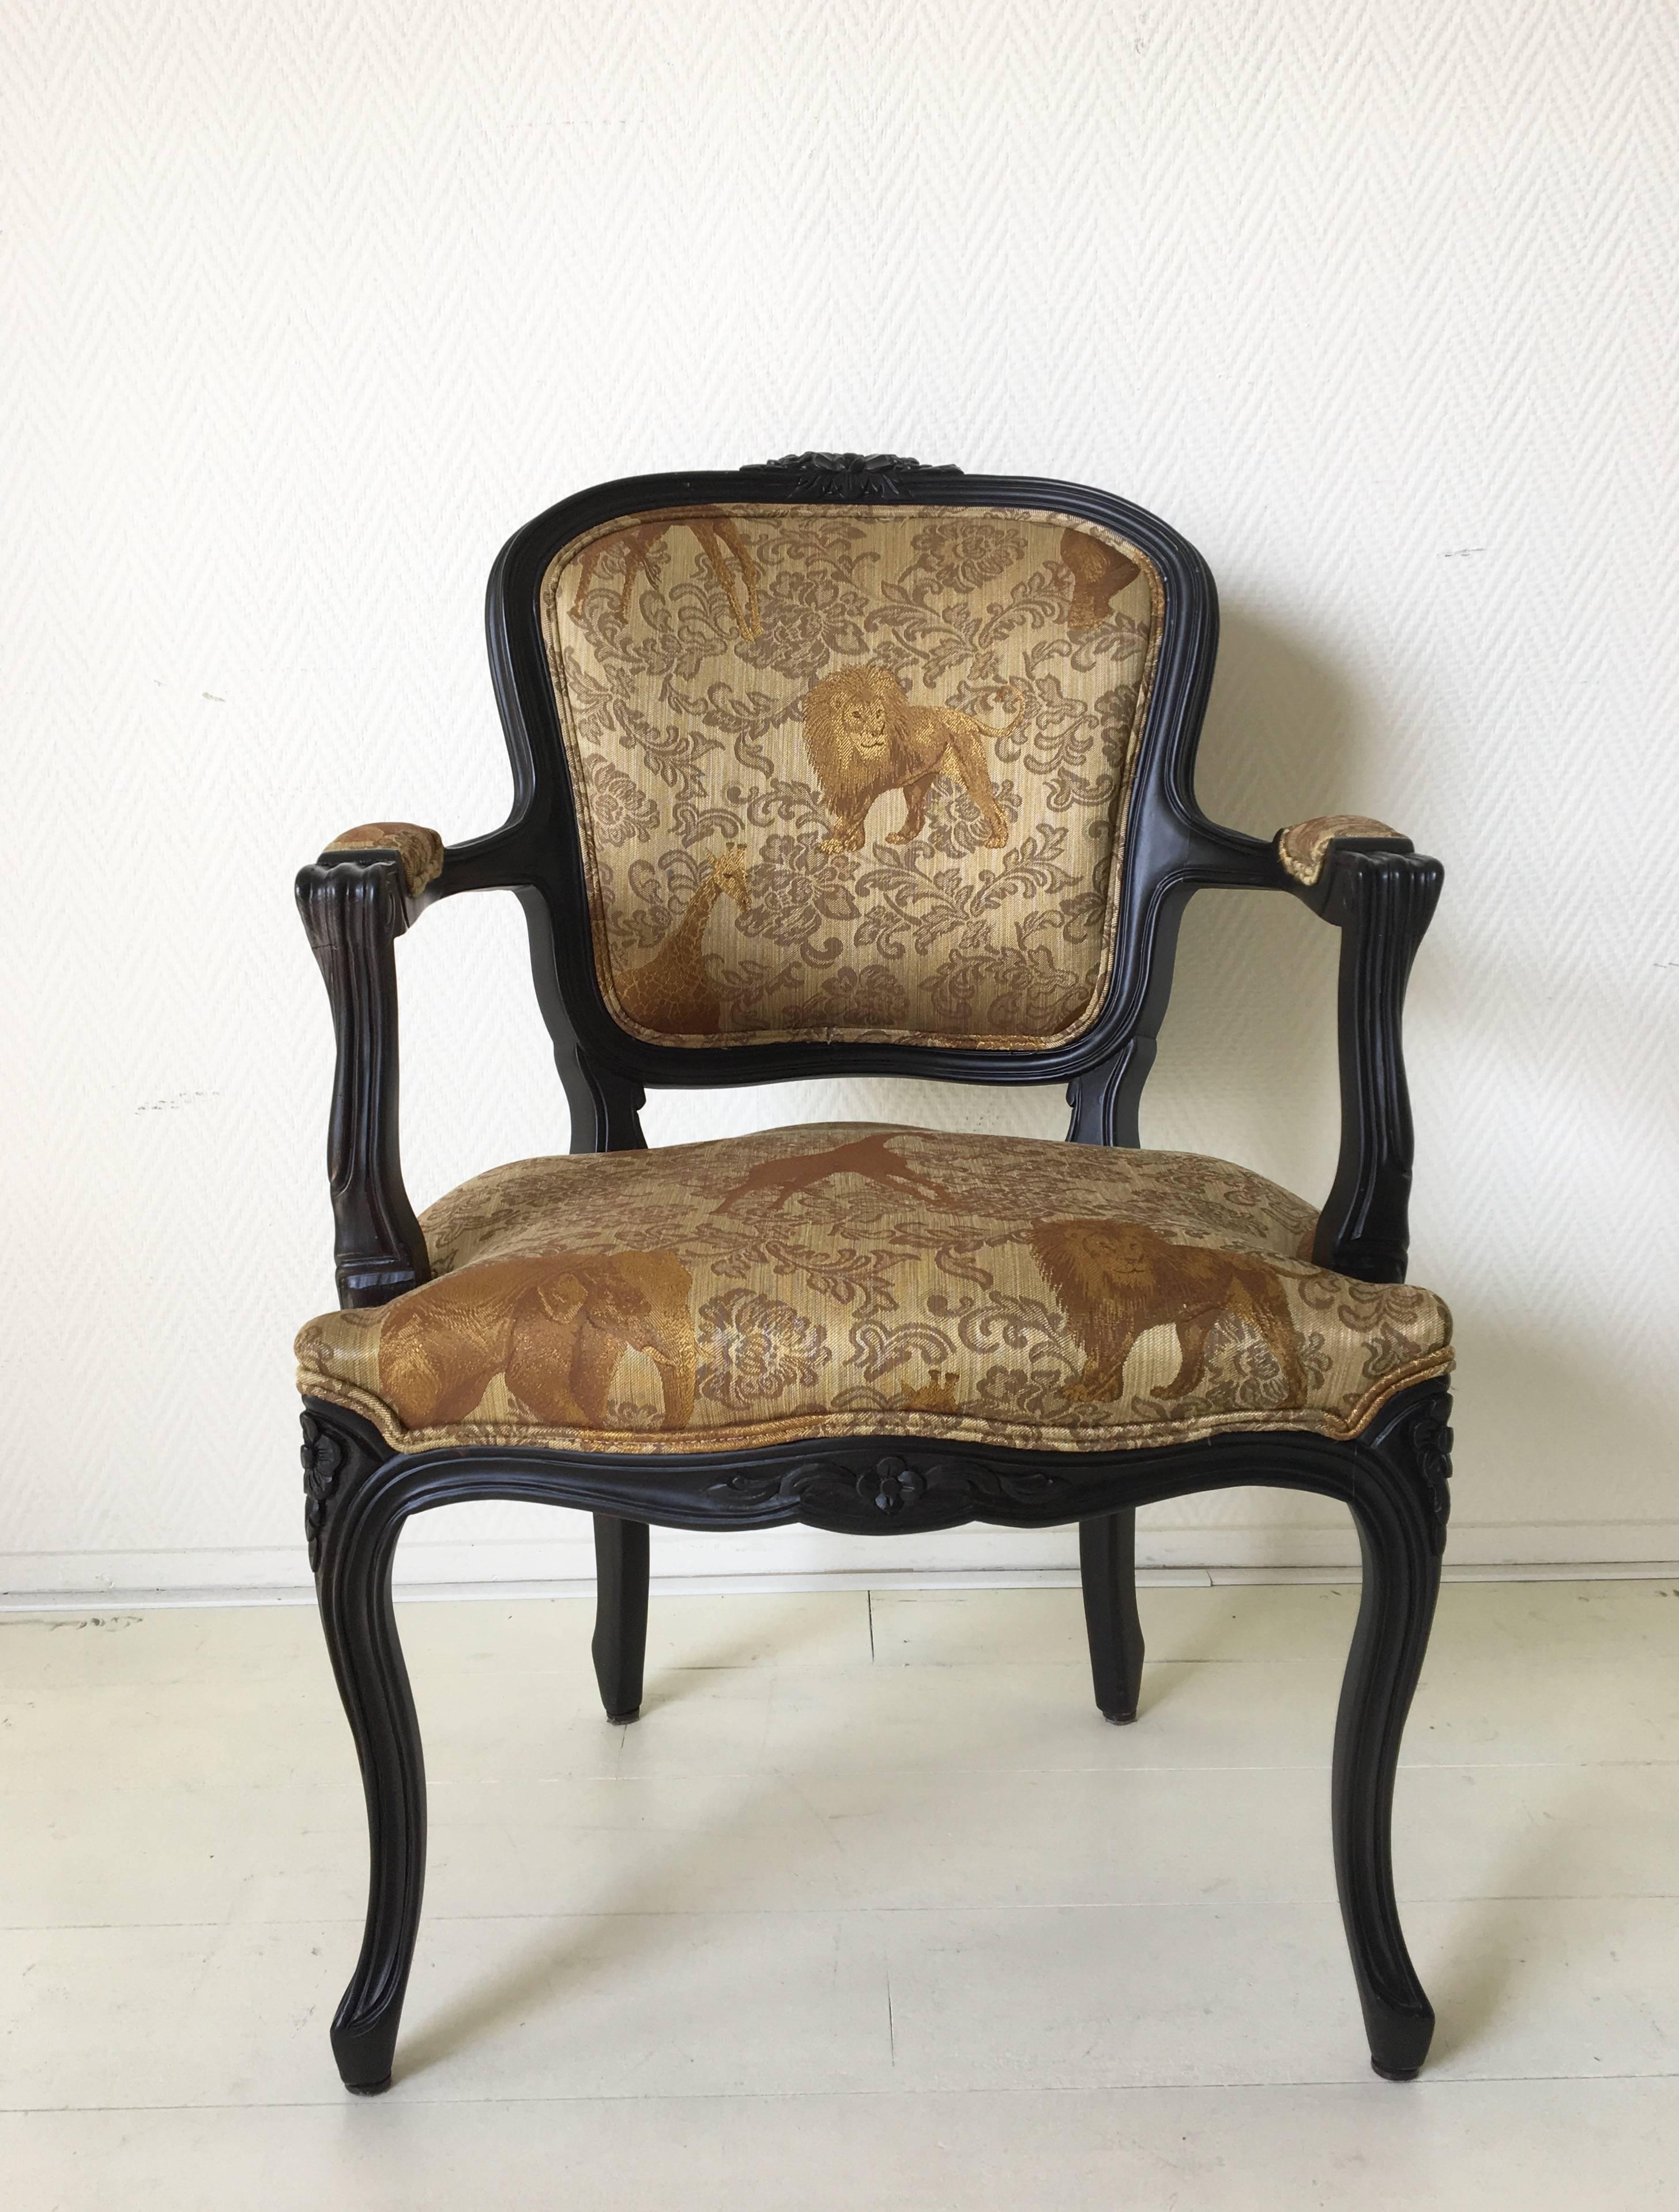 Exclusive design by the Spanish family company Ascension Latorre. The company is known for their hand made furniture. The chair features an ebonized wooden base with a gold colored upholstery with wildlife animals. This extraordinary piece remains